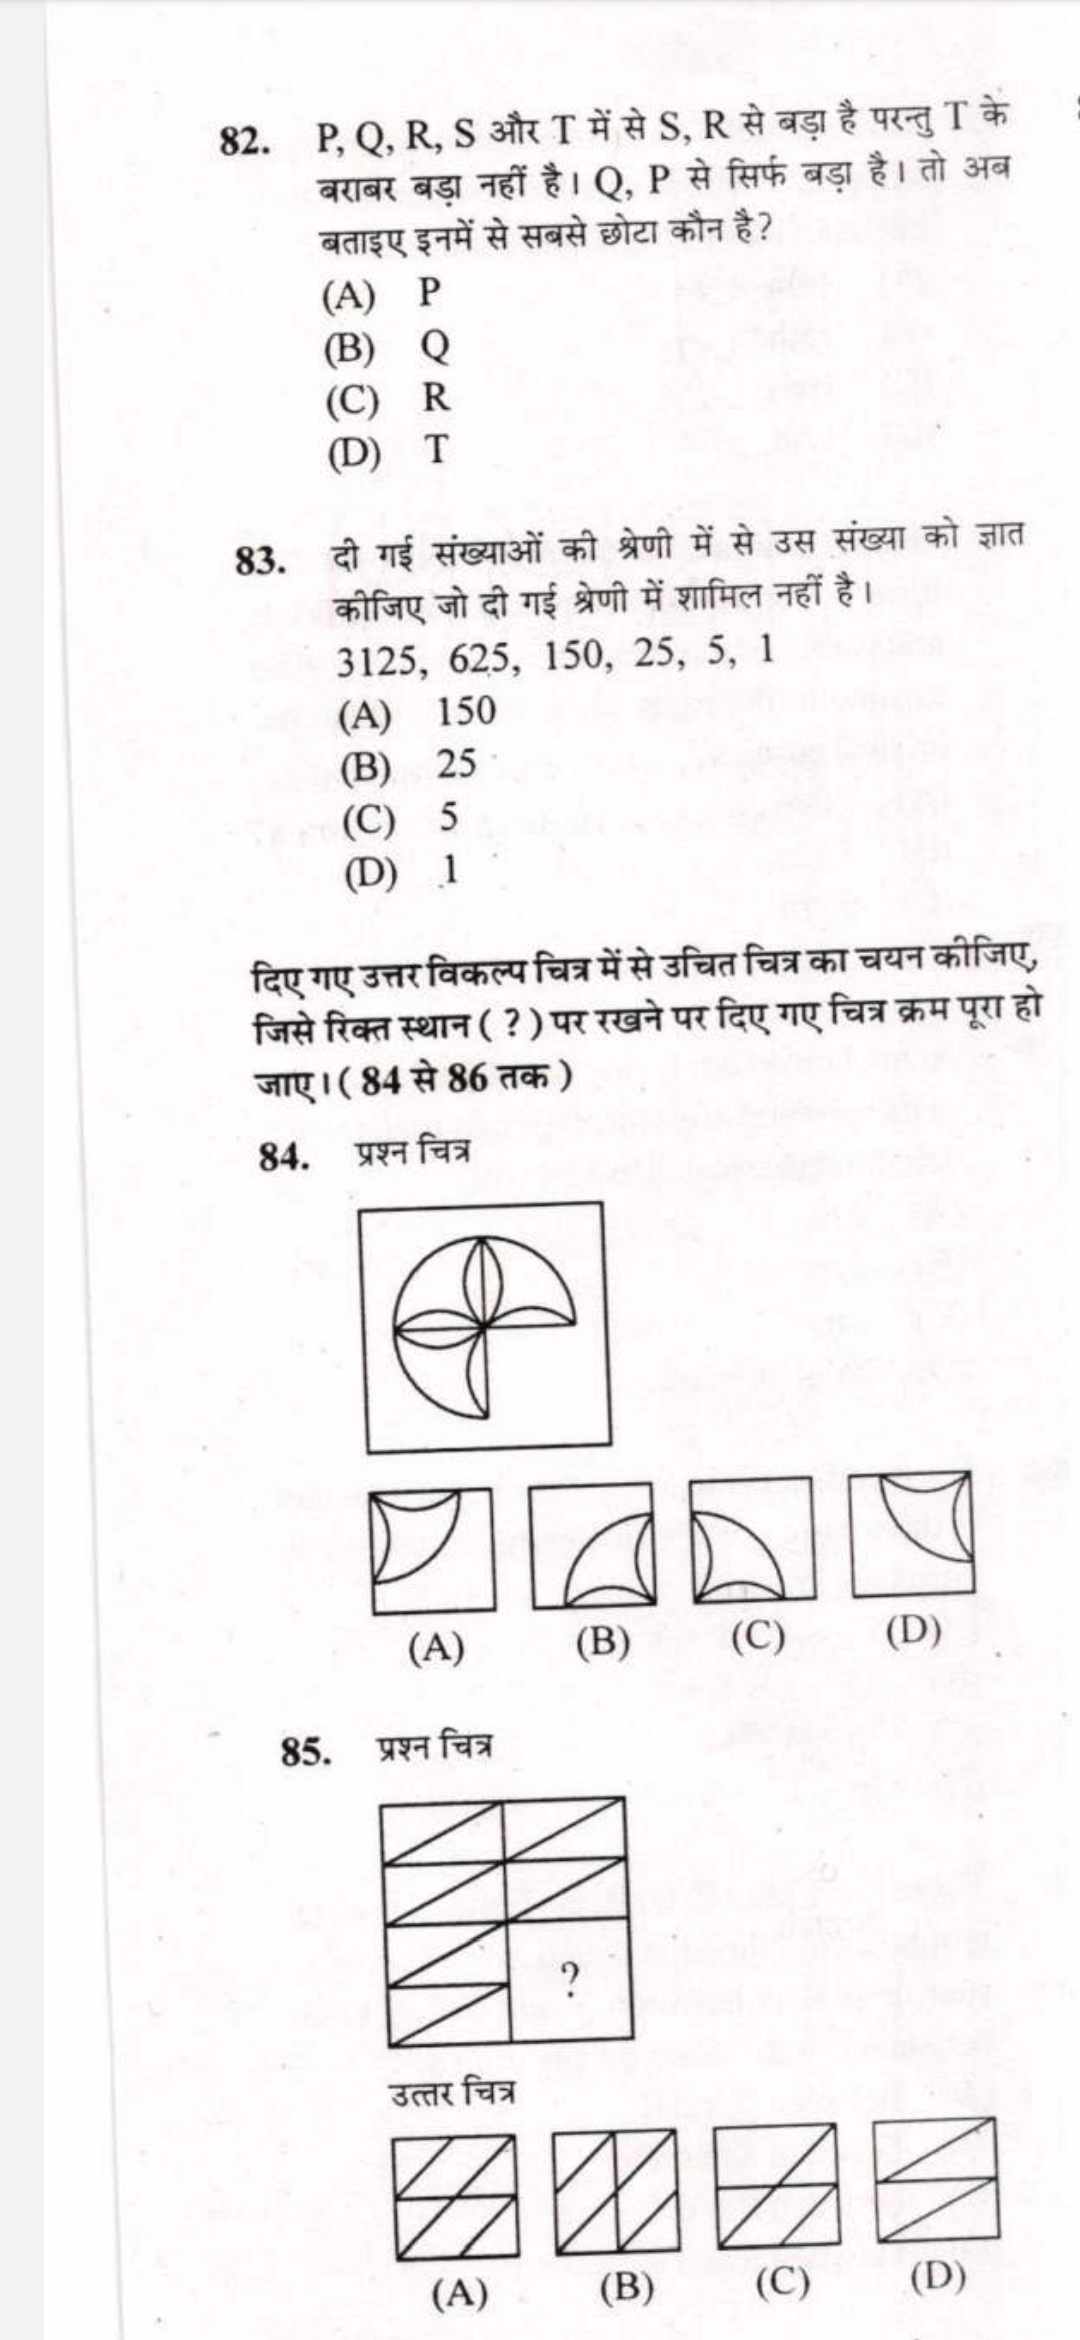 Reasoning questions 82 to 85